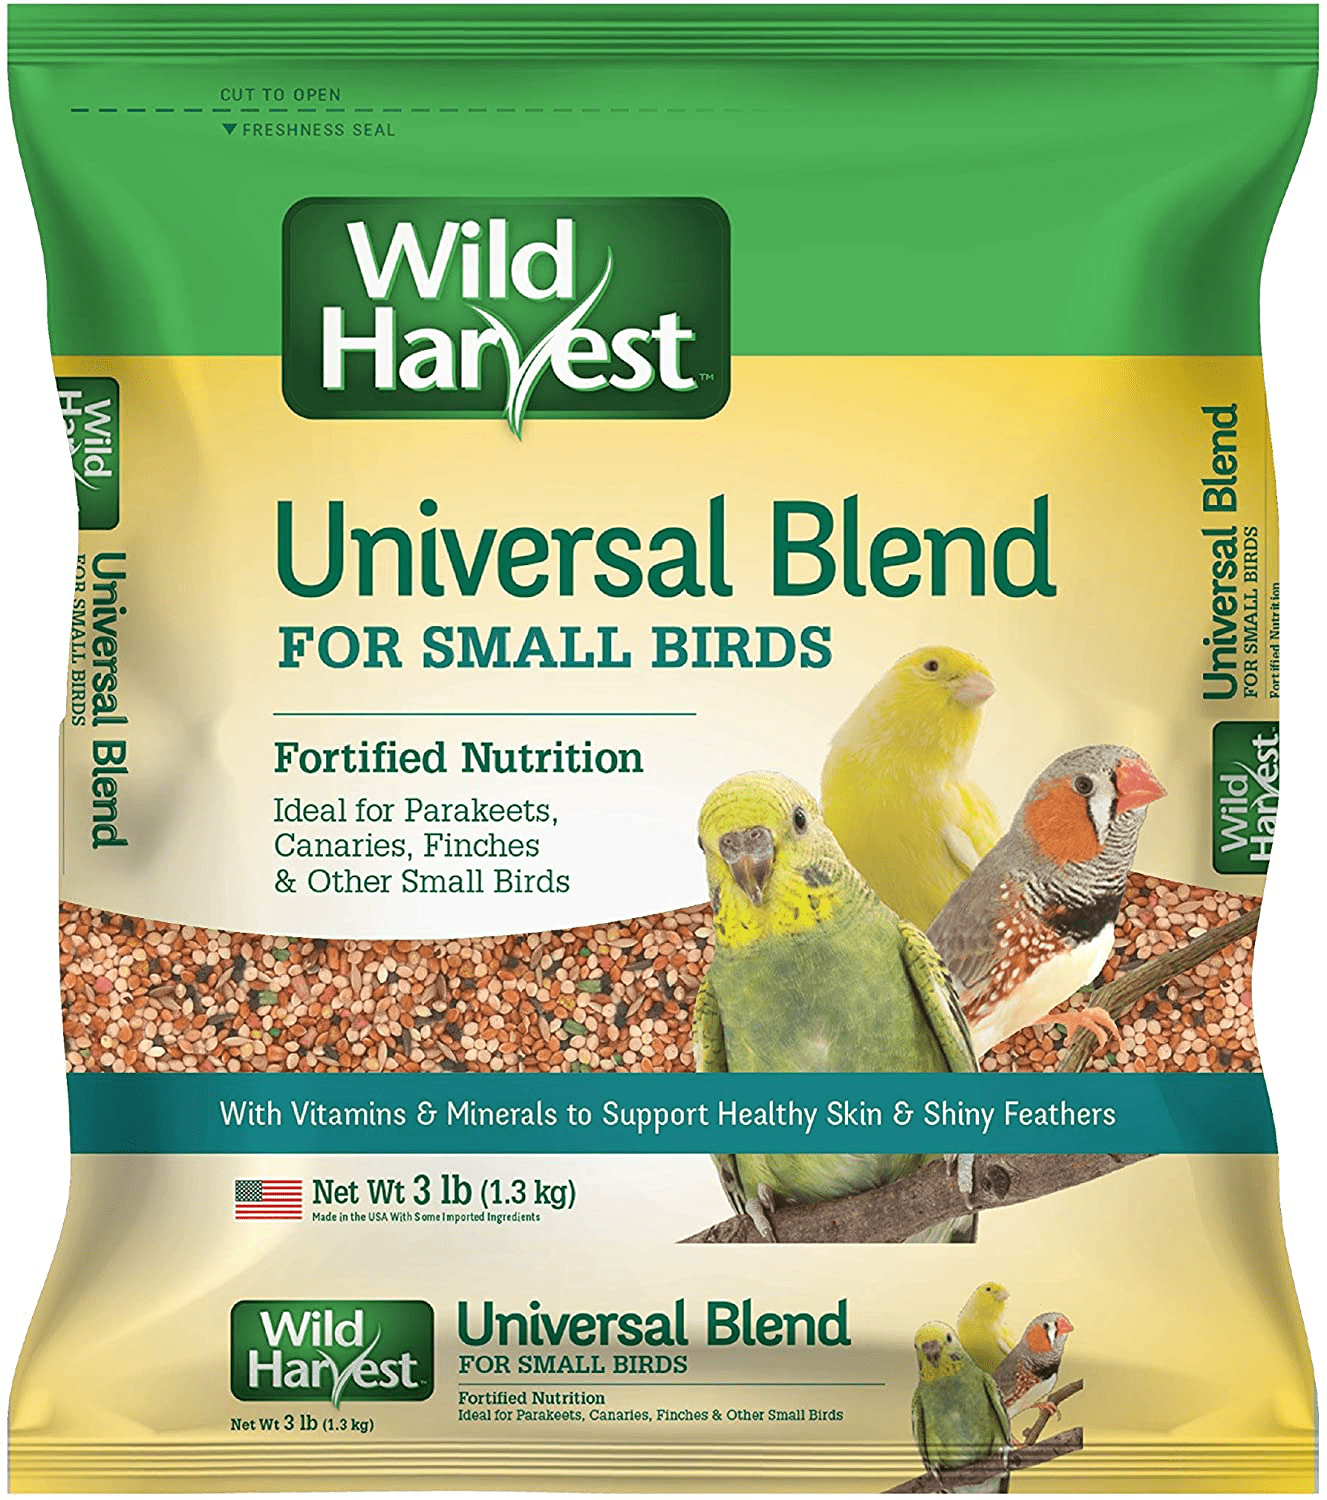 Wild Harvest Bird Seed Collection: Daily Blends and Advanced Nutrition for Parakeet, Canaries, Finches, Cockatiel, Parrots and More.